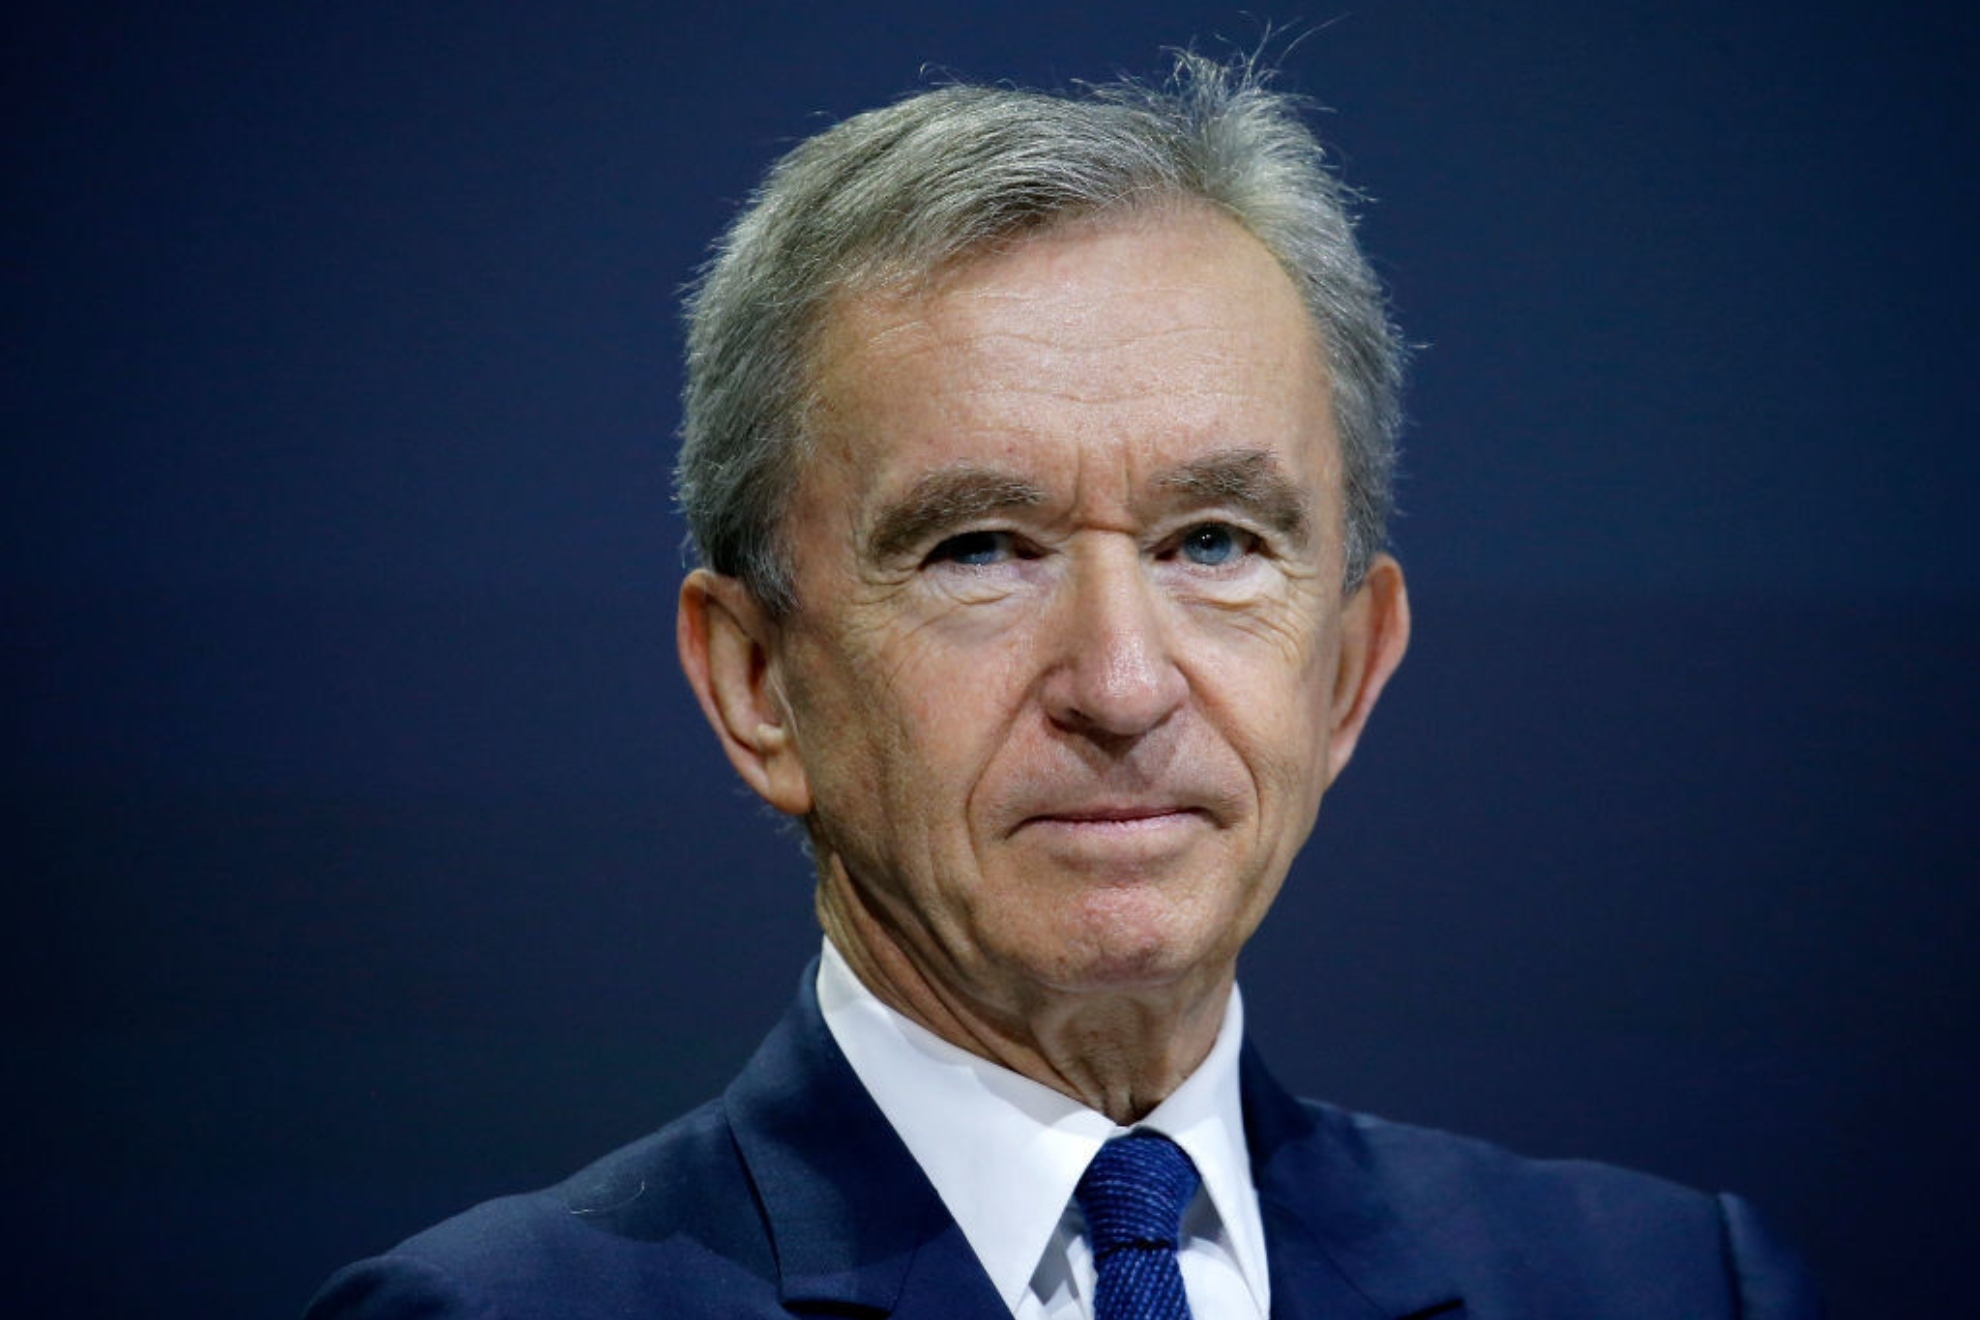 Richest person in the world, Bernard Arnault, loses 11 billion dollars in one day